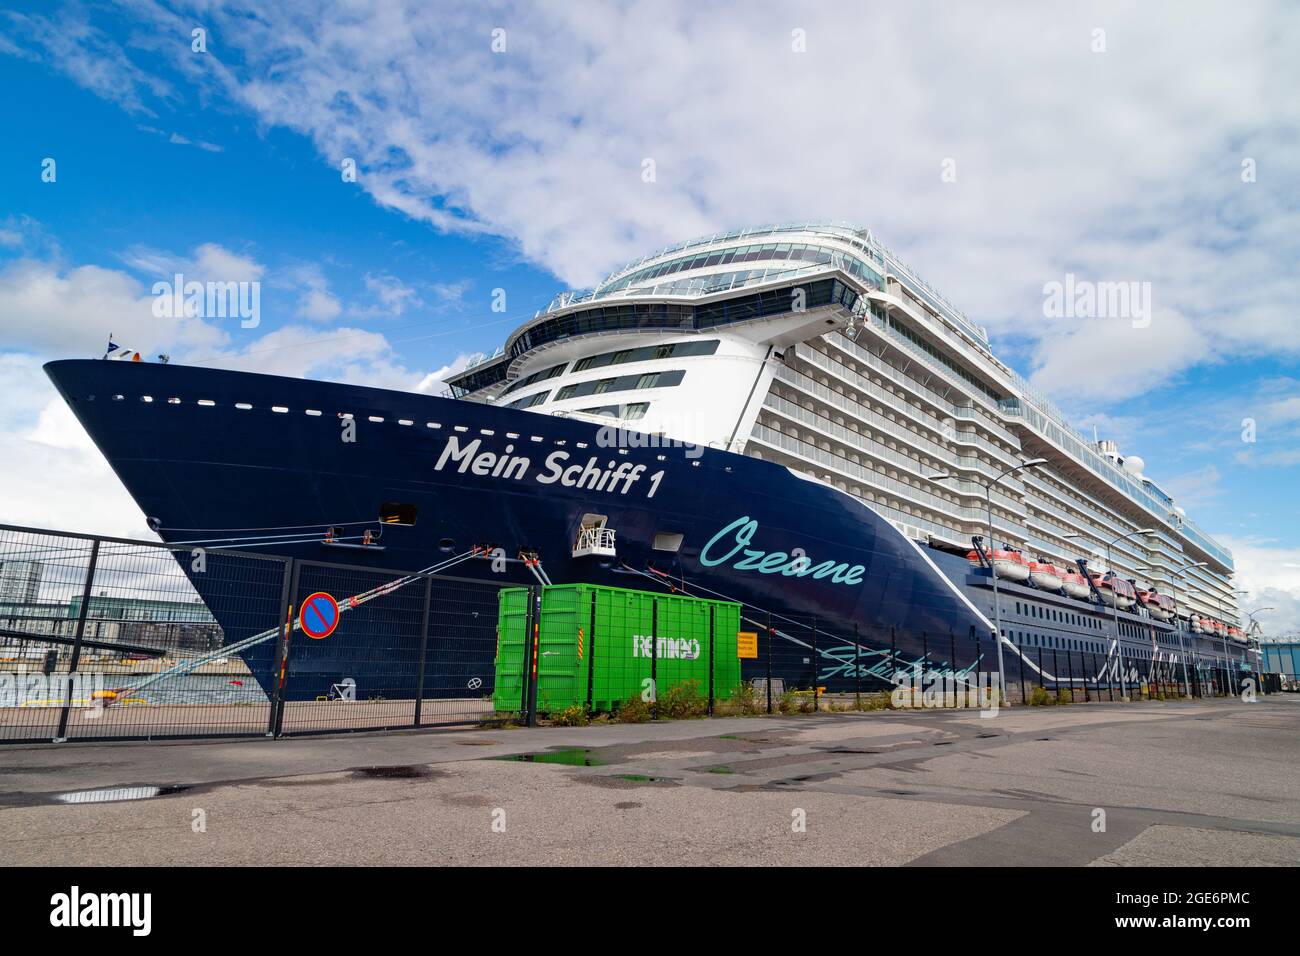 TUI Cruises-operated cruise ship Mein Schiff 1 alongside in Helsinki on August 15, 2021. She is the second cruise ship in Helsinki during 2021 season. Stock Photo